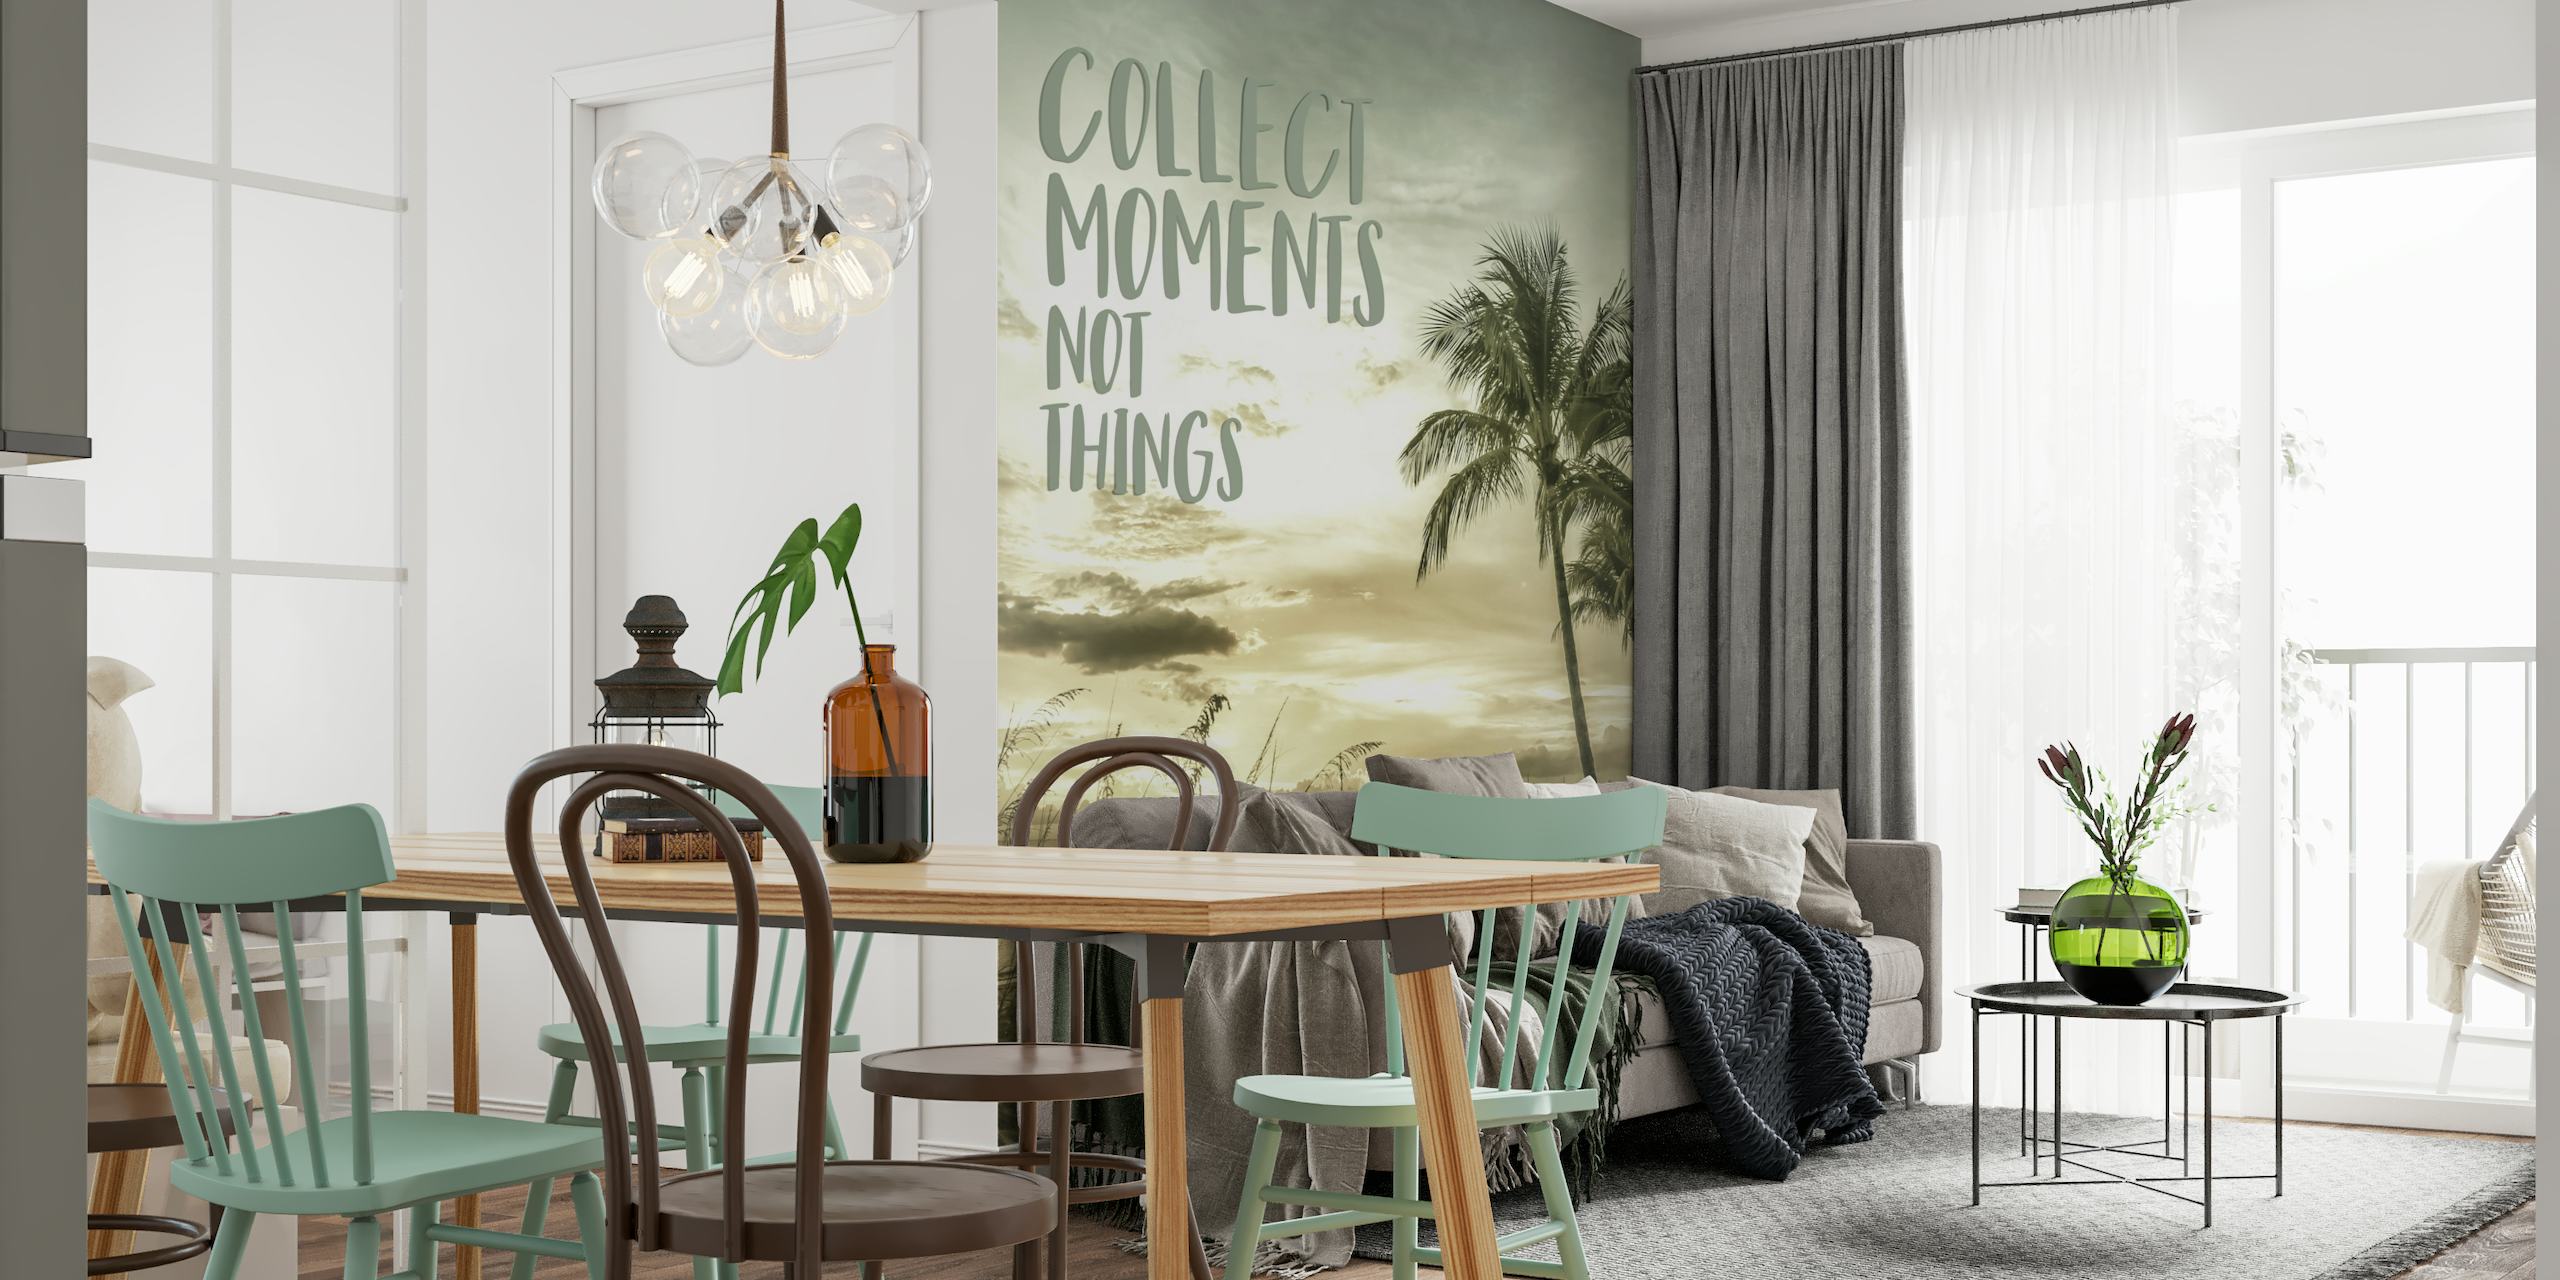 Collect moments not things | Sunset behang